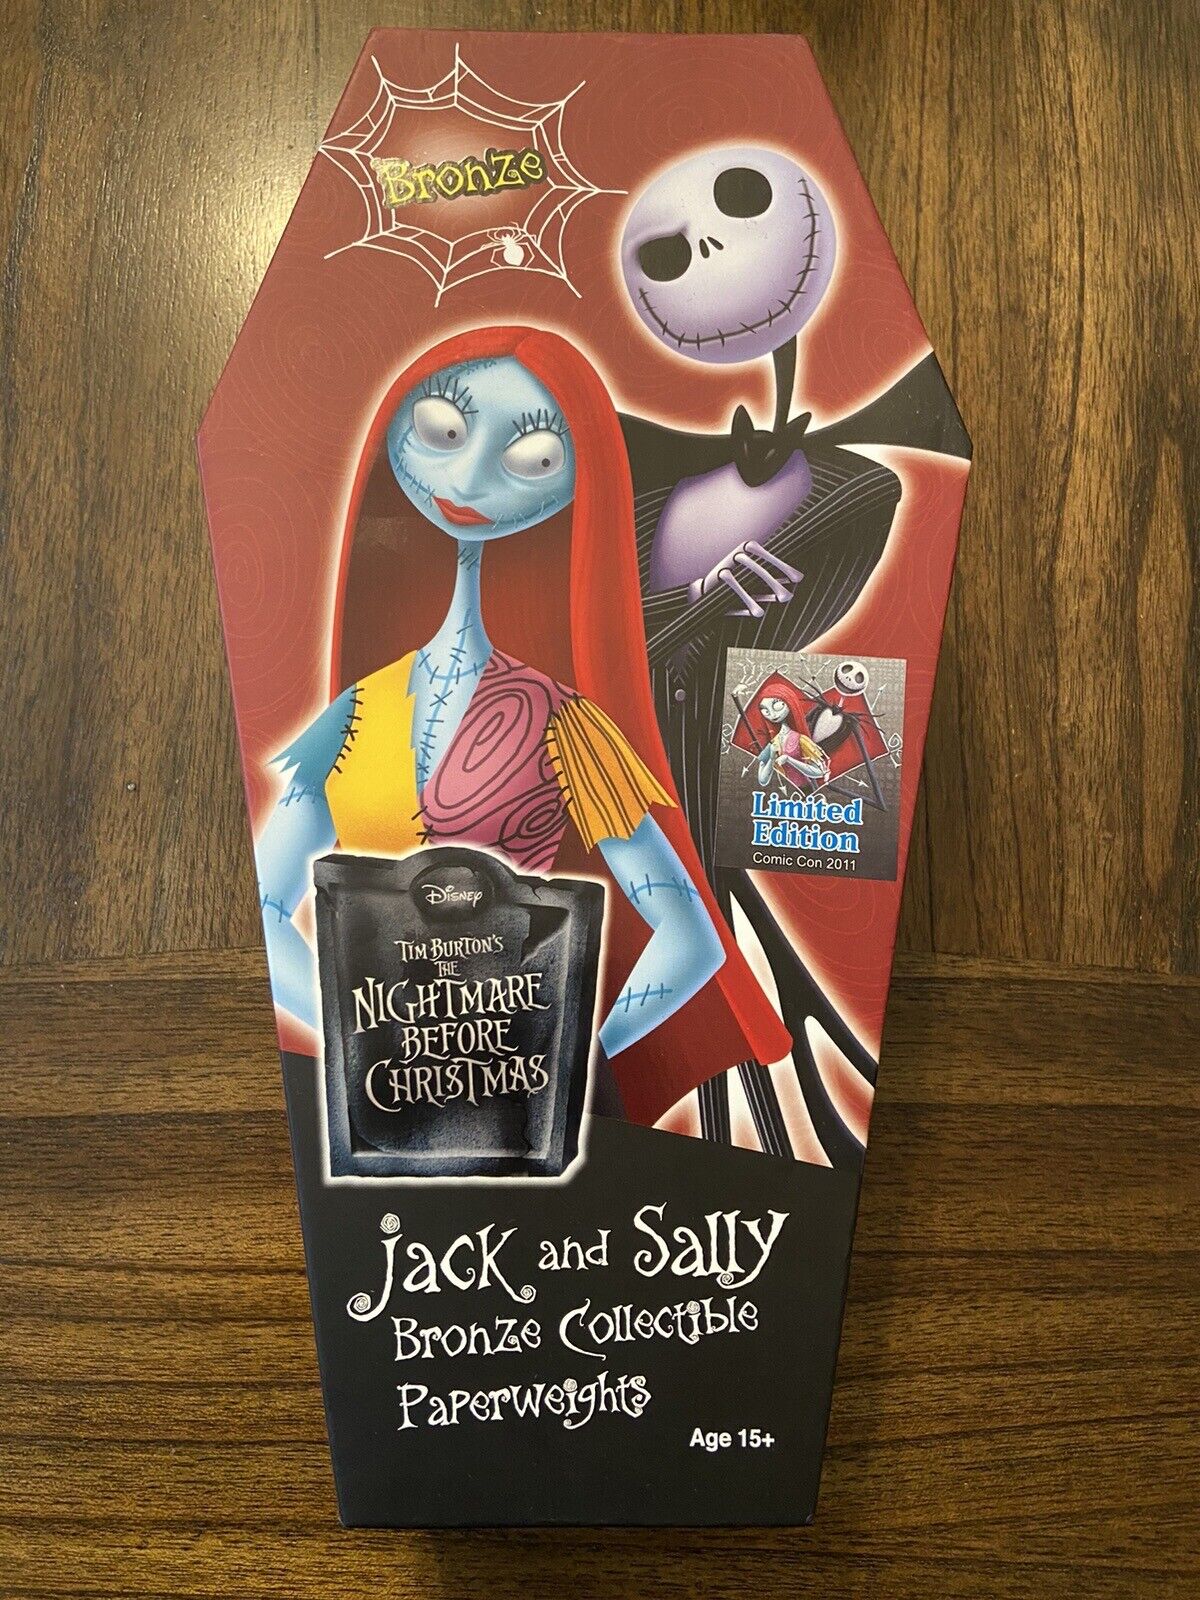 Disney Original Jack And Sally Bronze Collectible Paperweights Limited Edition